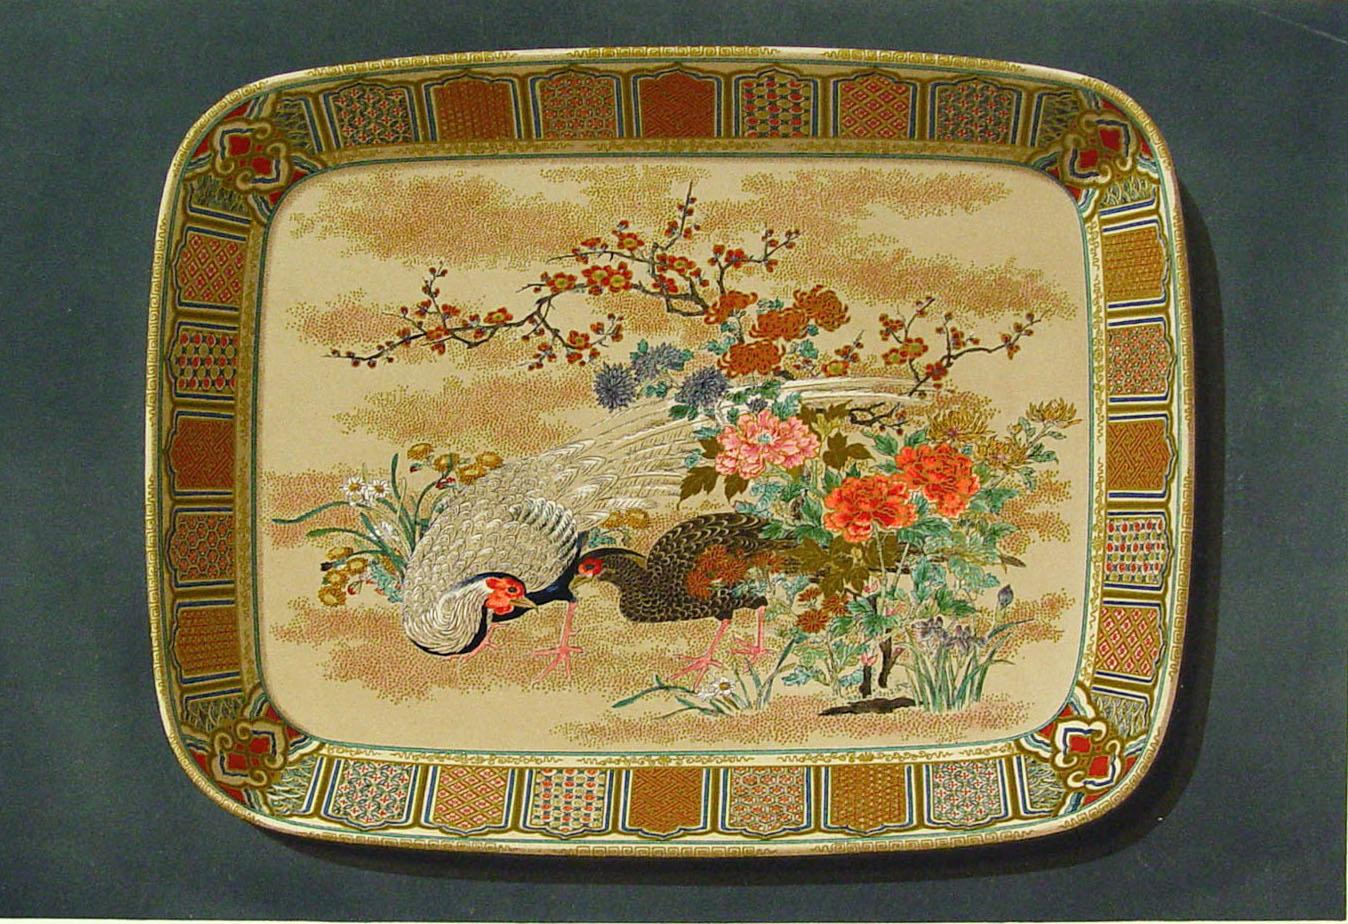 Pair of Satsuma ceramics lithographs on paper, with metallic gold accents. Firman Didot et Cie Lithograph, Paris, France, circa 1875.  Pheasants, rooster and floral decoration. From the series Keramic Art of Japan a pictorial collection of Japanese